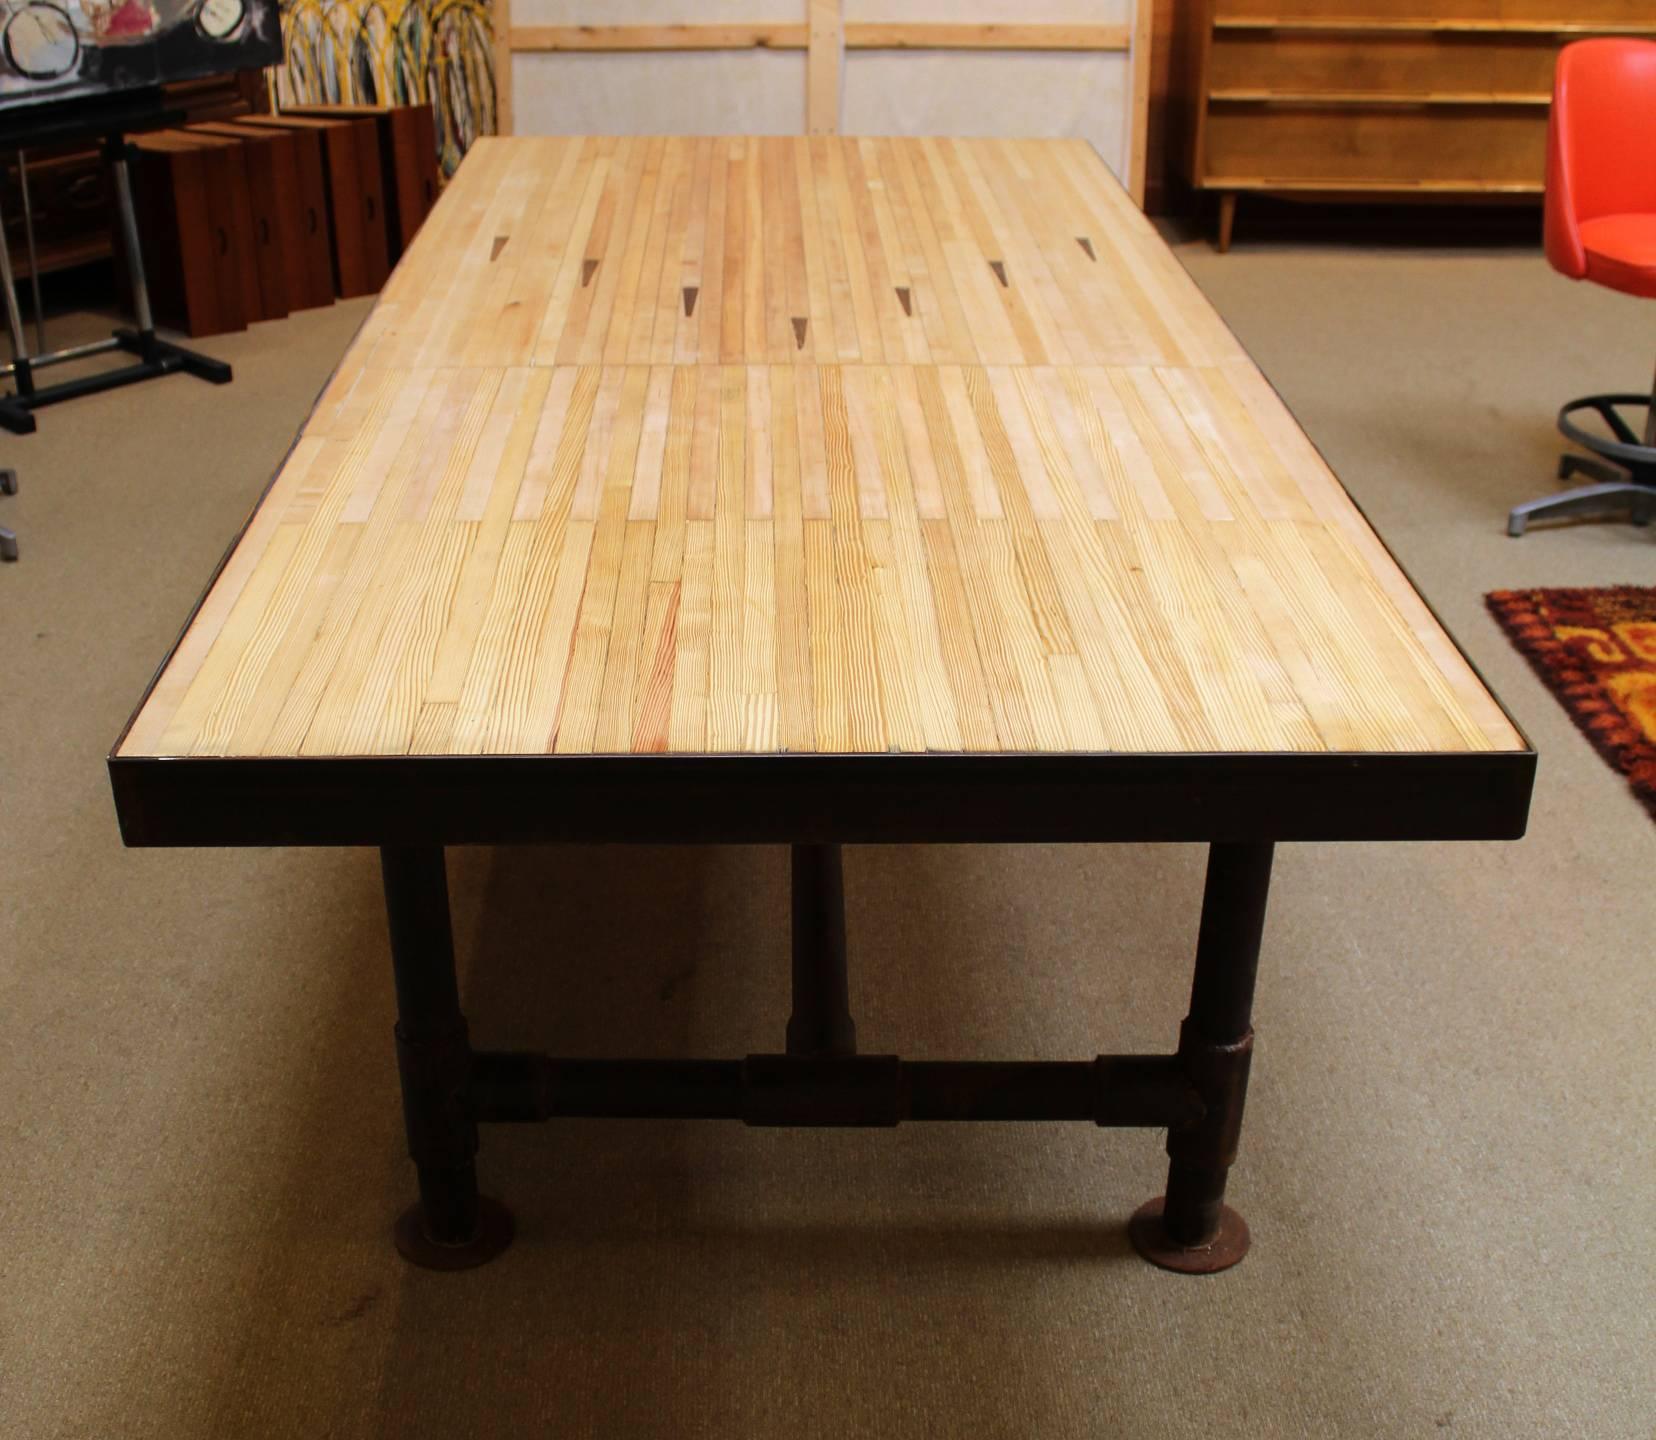 Large dining room table with vintage bowling alley floor for top and reclaimed Industrial piping for legs.